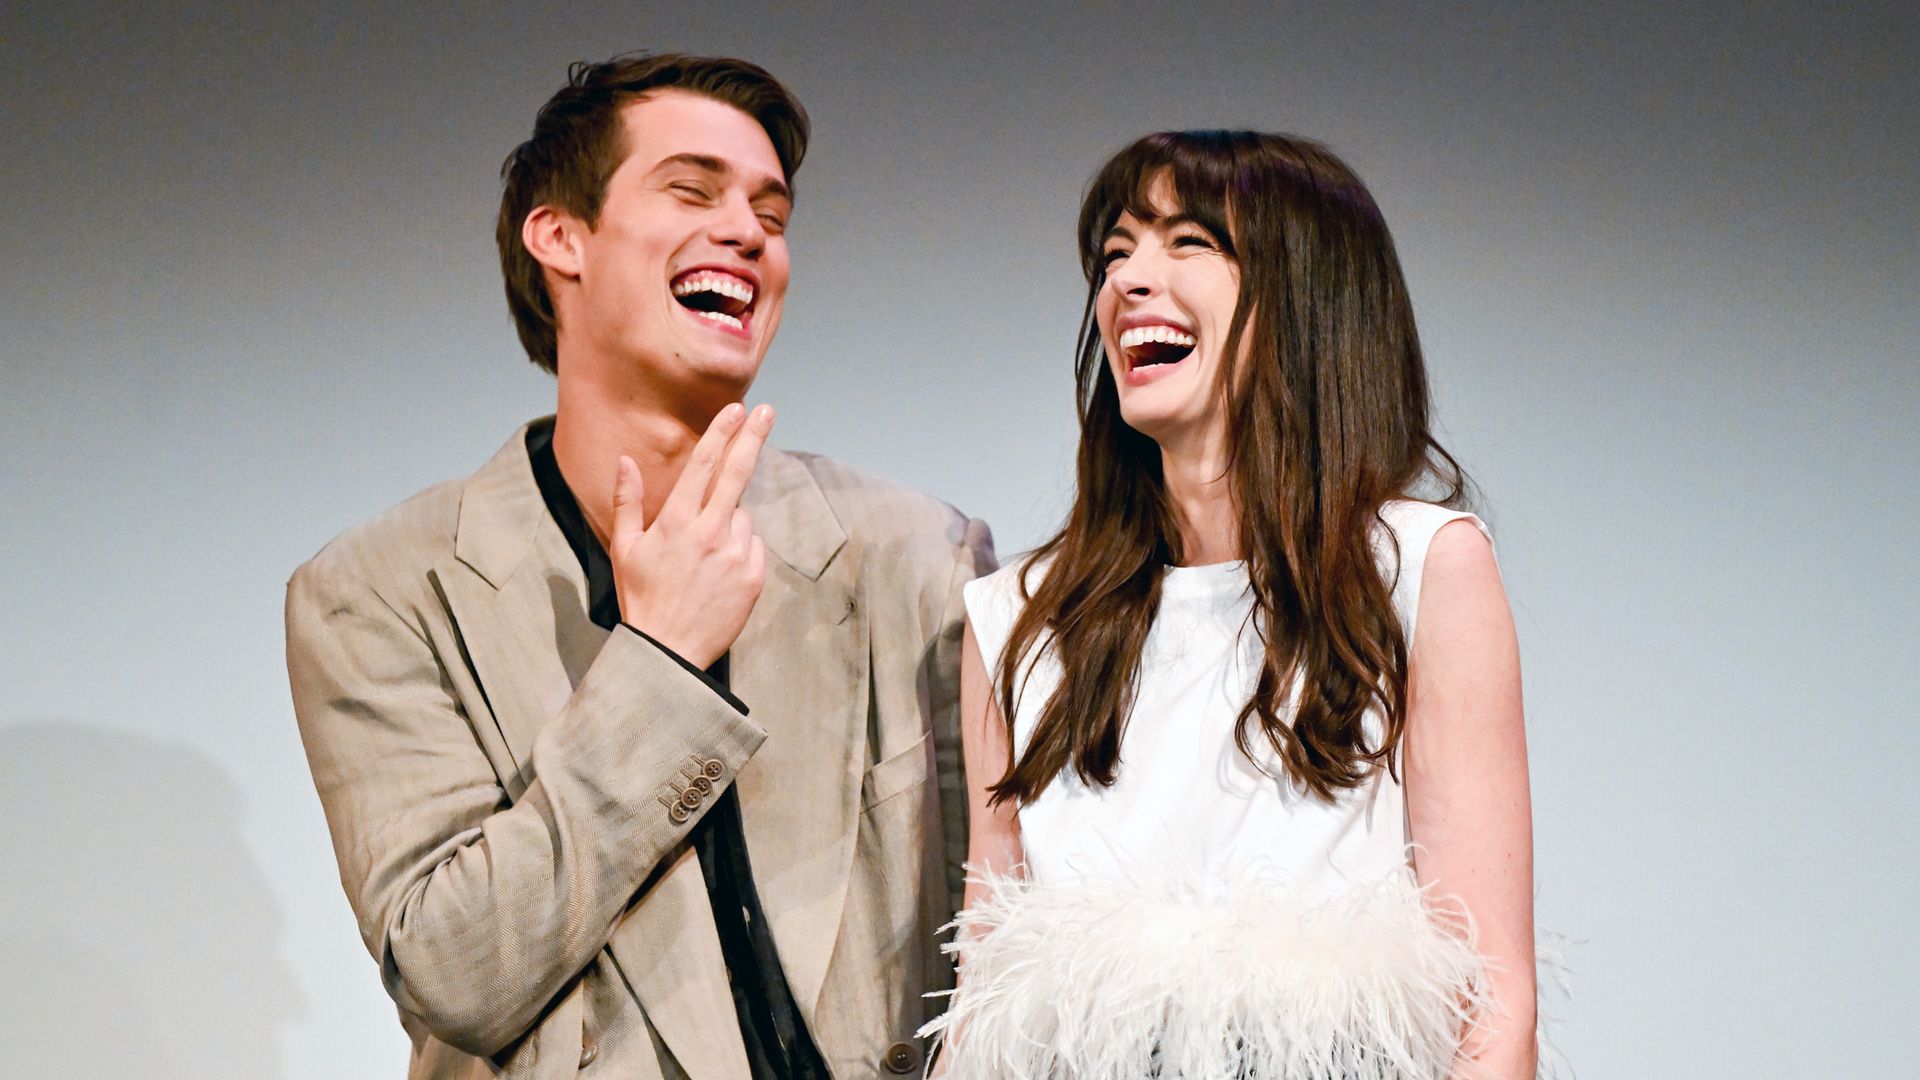 Nicholas Galitzine and Anne Hathaway at the 'The Idea of You' premiere as part of SXSW 2024 Conference and Festivals held at the Paramount Theatre on March 16, 2024 in Austin, Texas